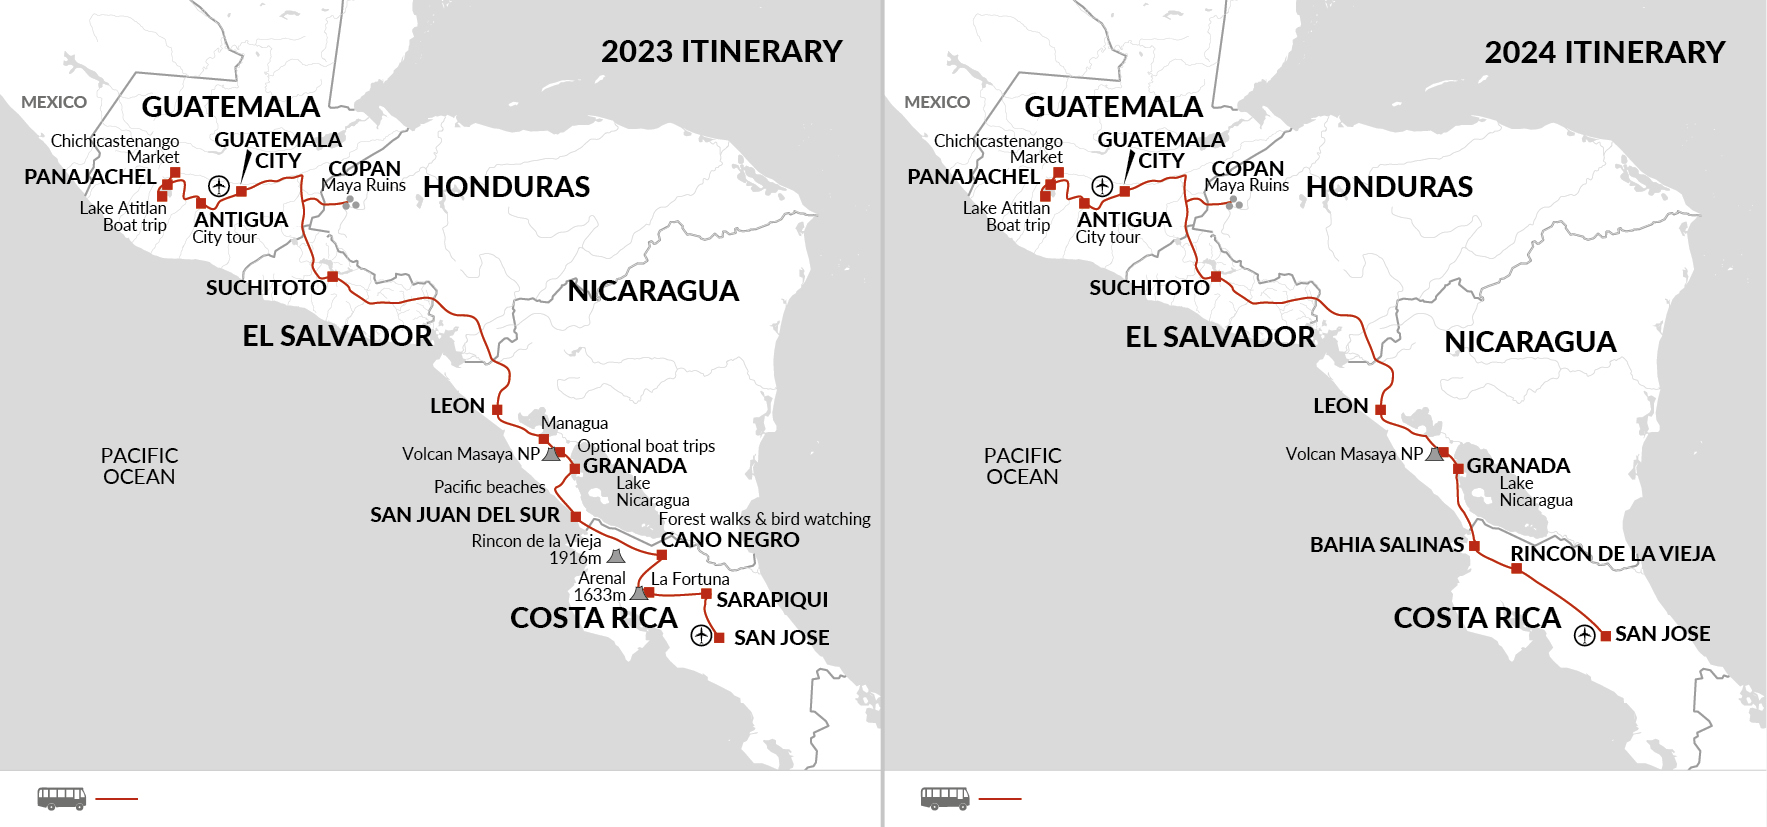 2023 and 2024 itinerary 